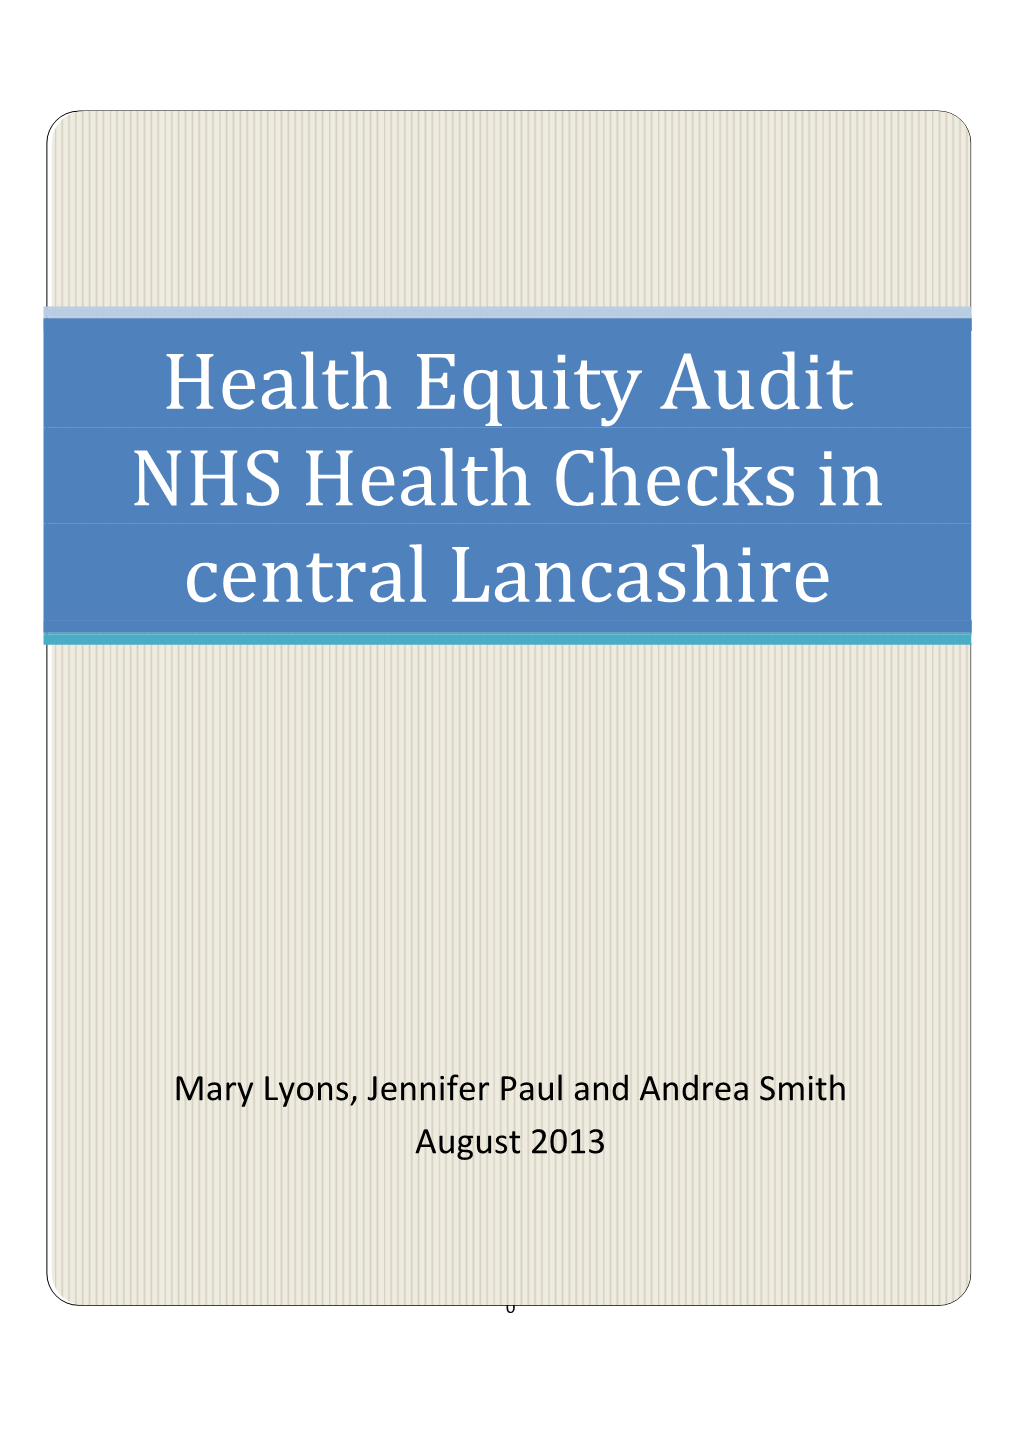 Health Equity Audit NHS Health Checks in Central Lancashire